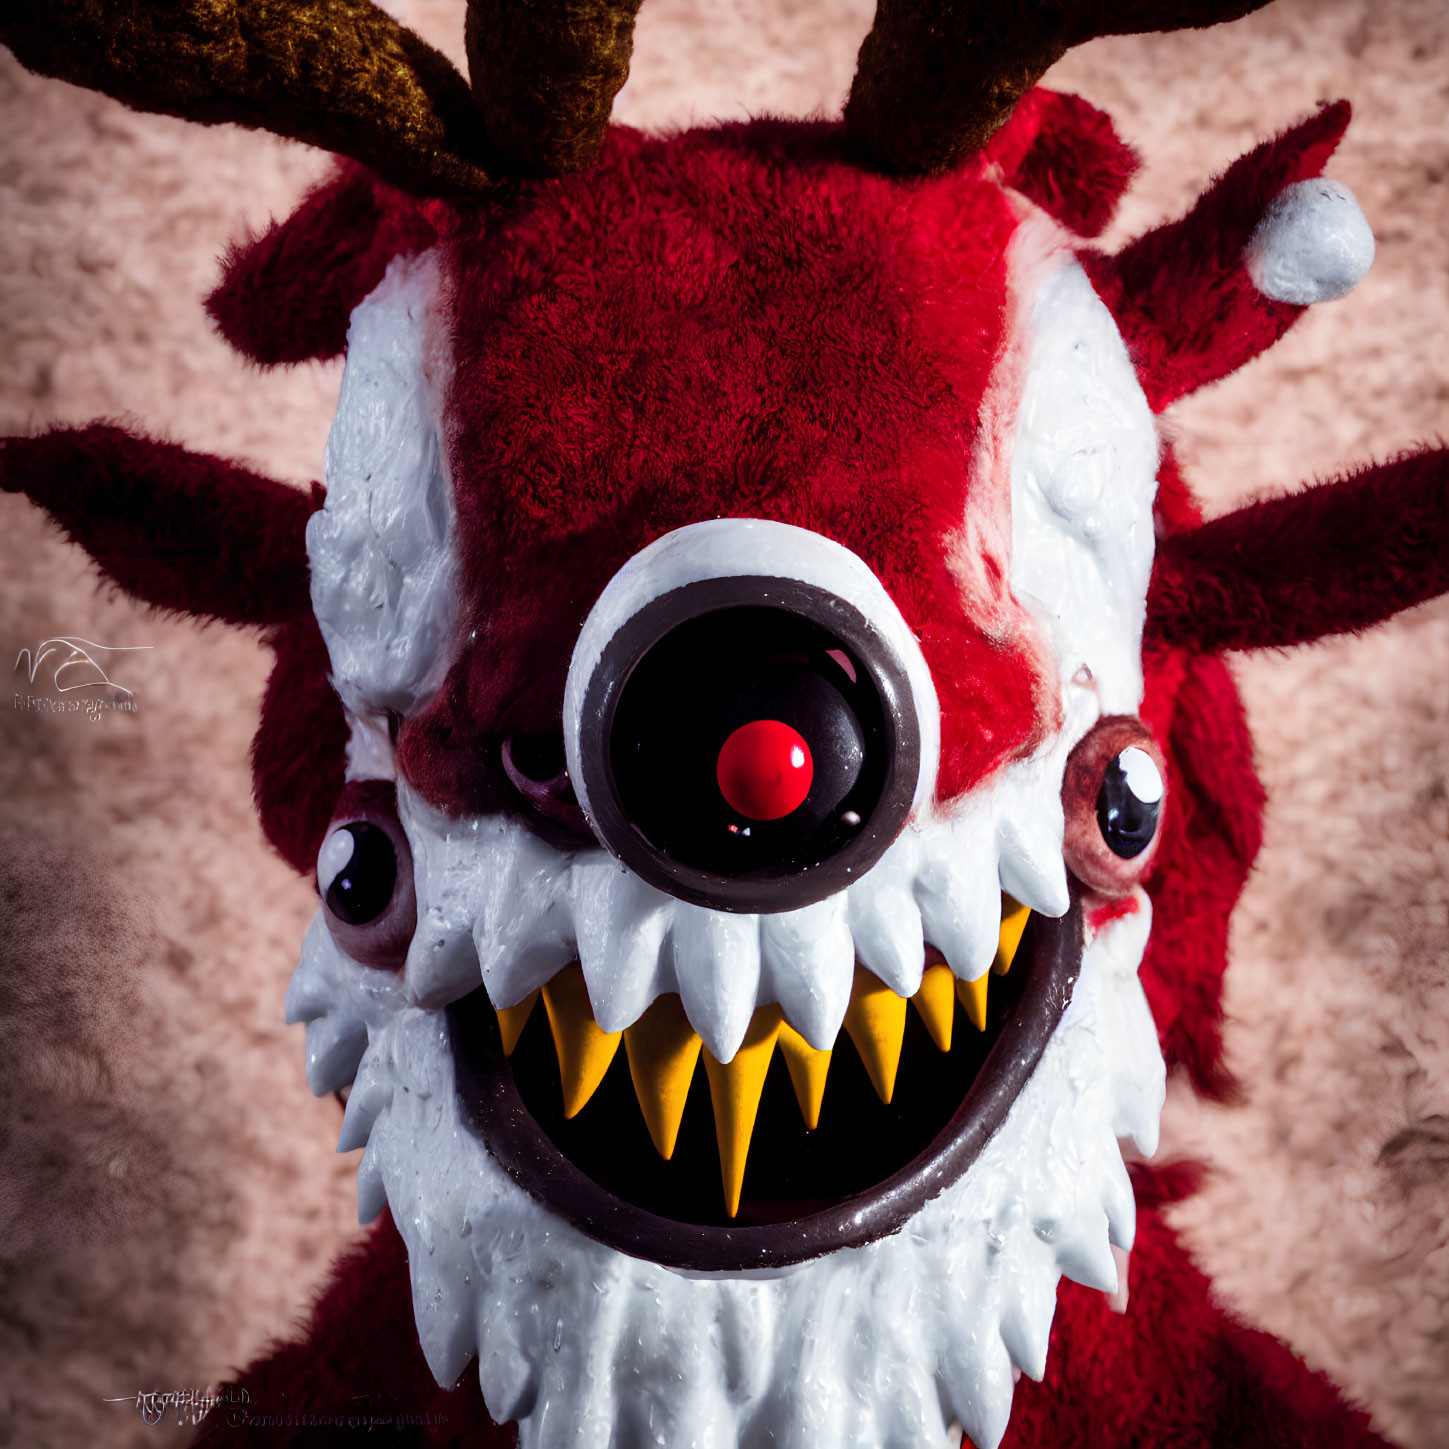 Whimsical red and white plush creature with large eye and antlers